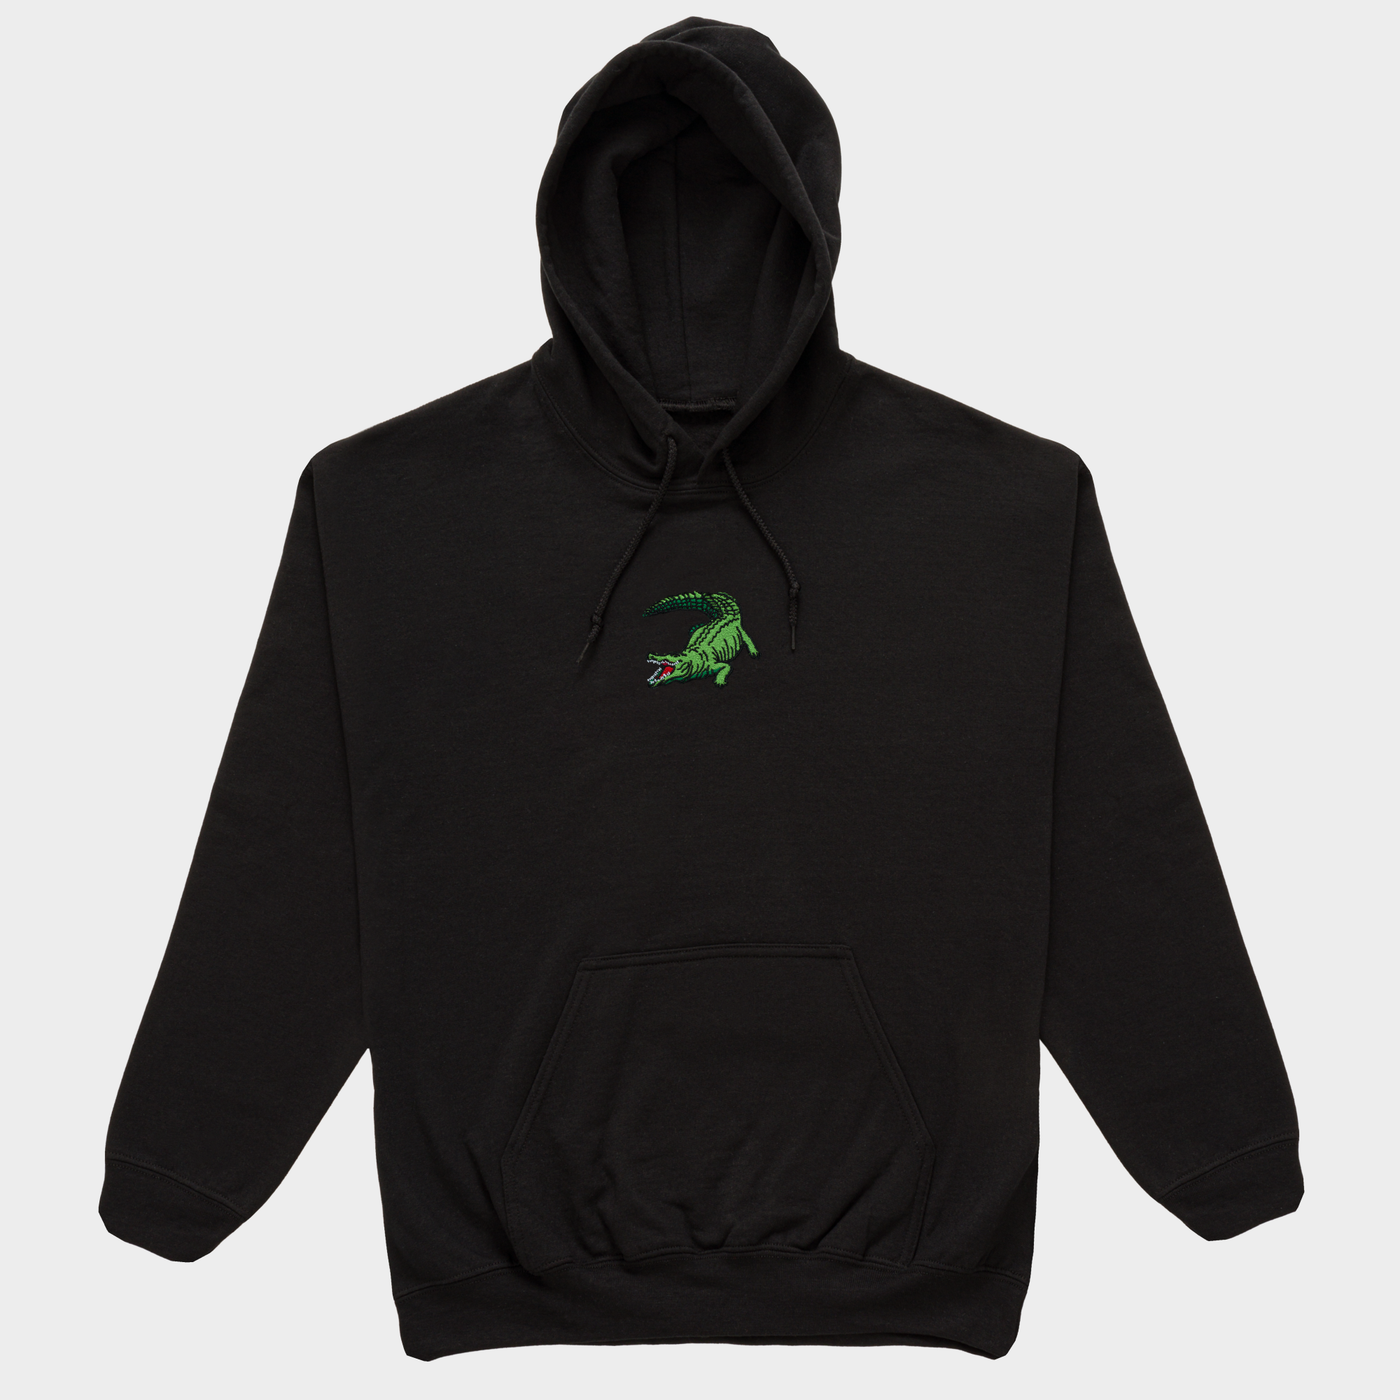 Bobby's Planet Men's Embroidered Saltwater Crocodile Hoodie from Australia Down Under Animals Collection in Black Color#color_black